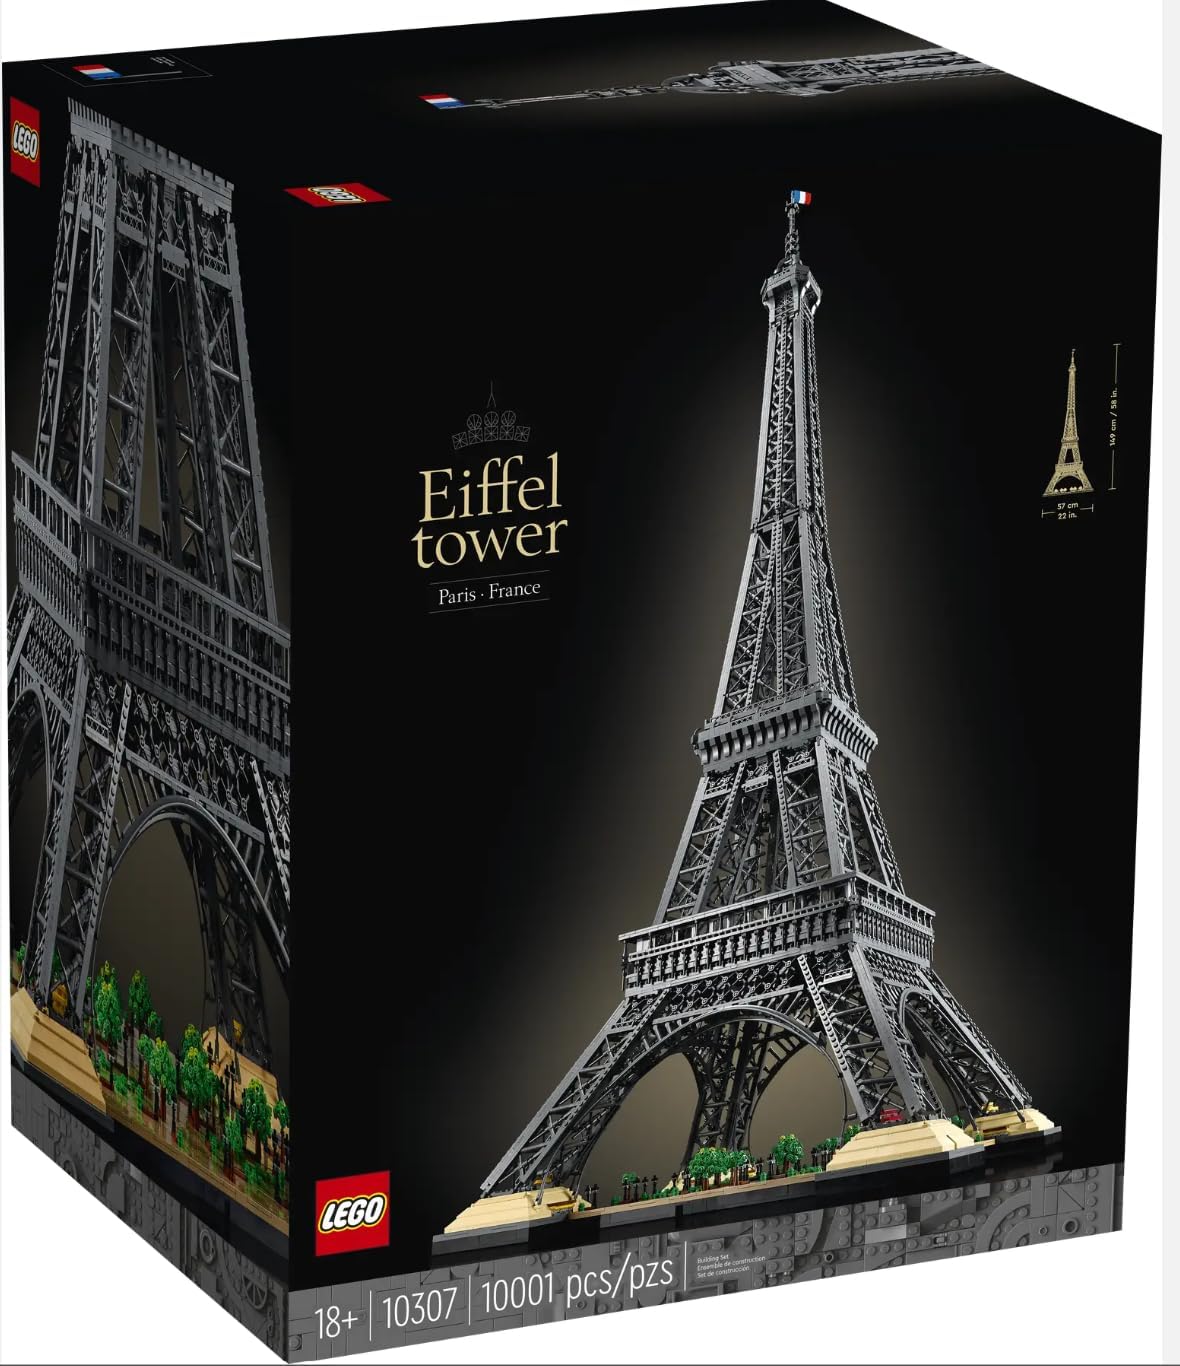 LEGO Brand Toy Building Block Set - LEGO Eiffel Tower 10001 Pieces, Unique Building Experience for Ages 36 and Up